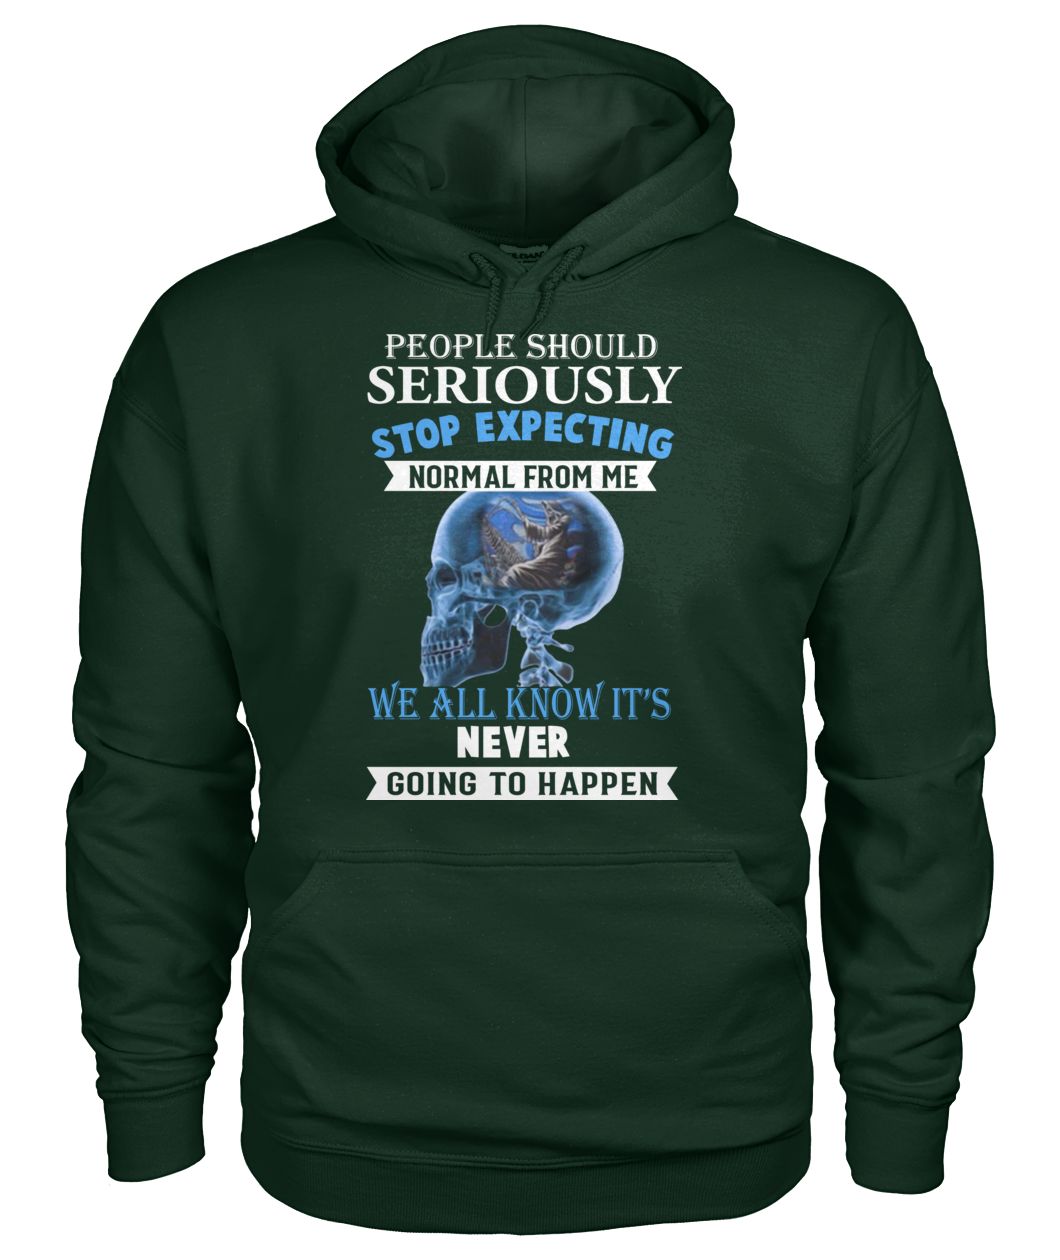 Skull head people should seriously stop expecting normal from me gildan hoodie